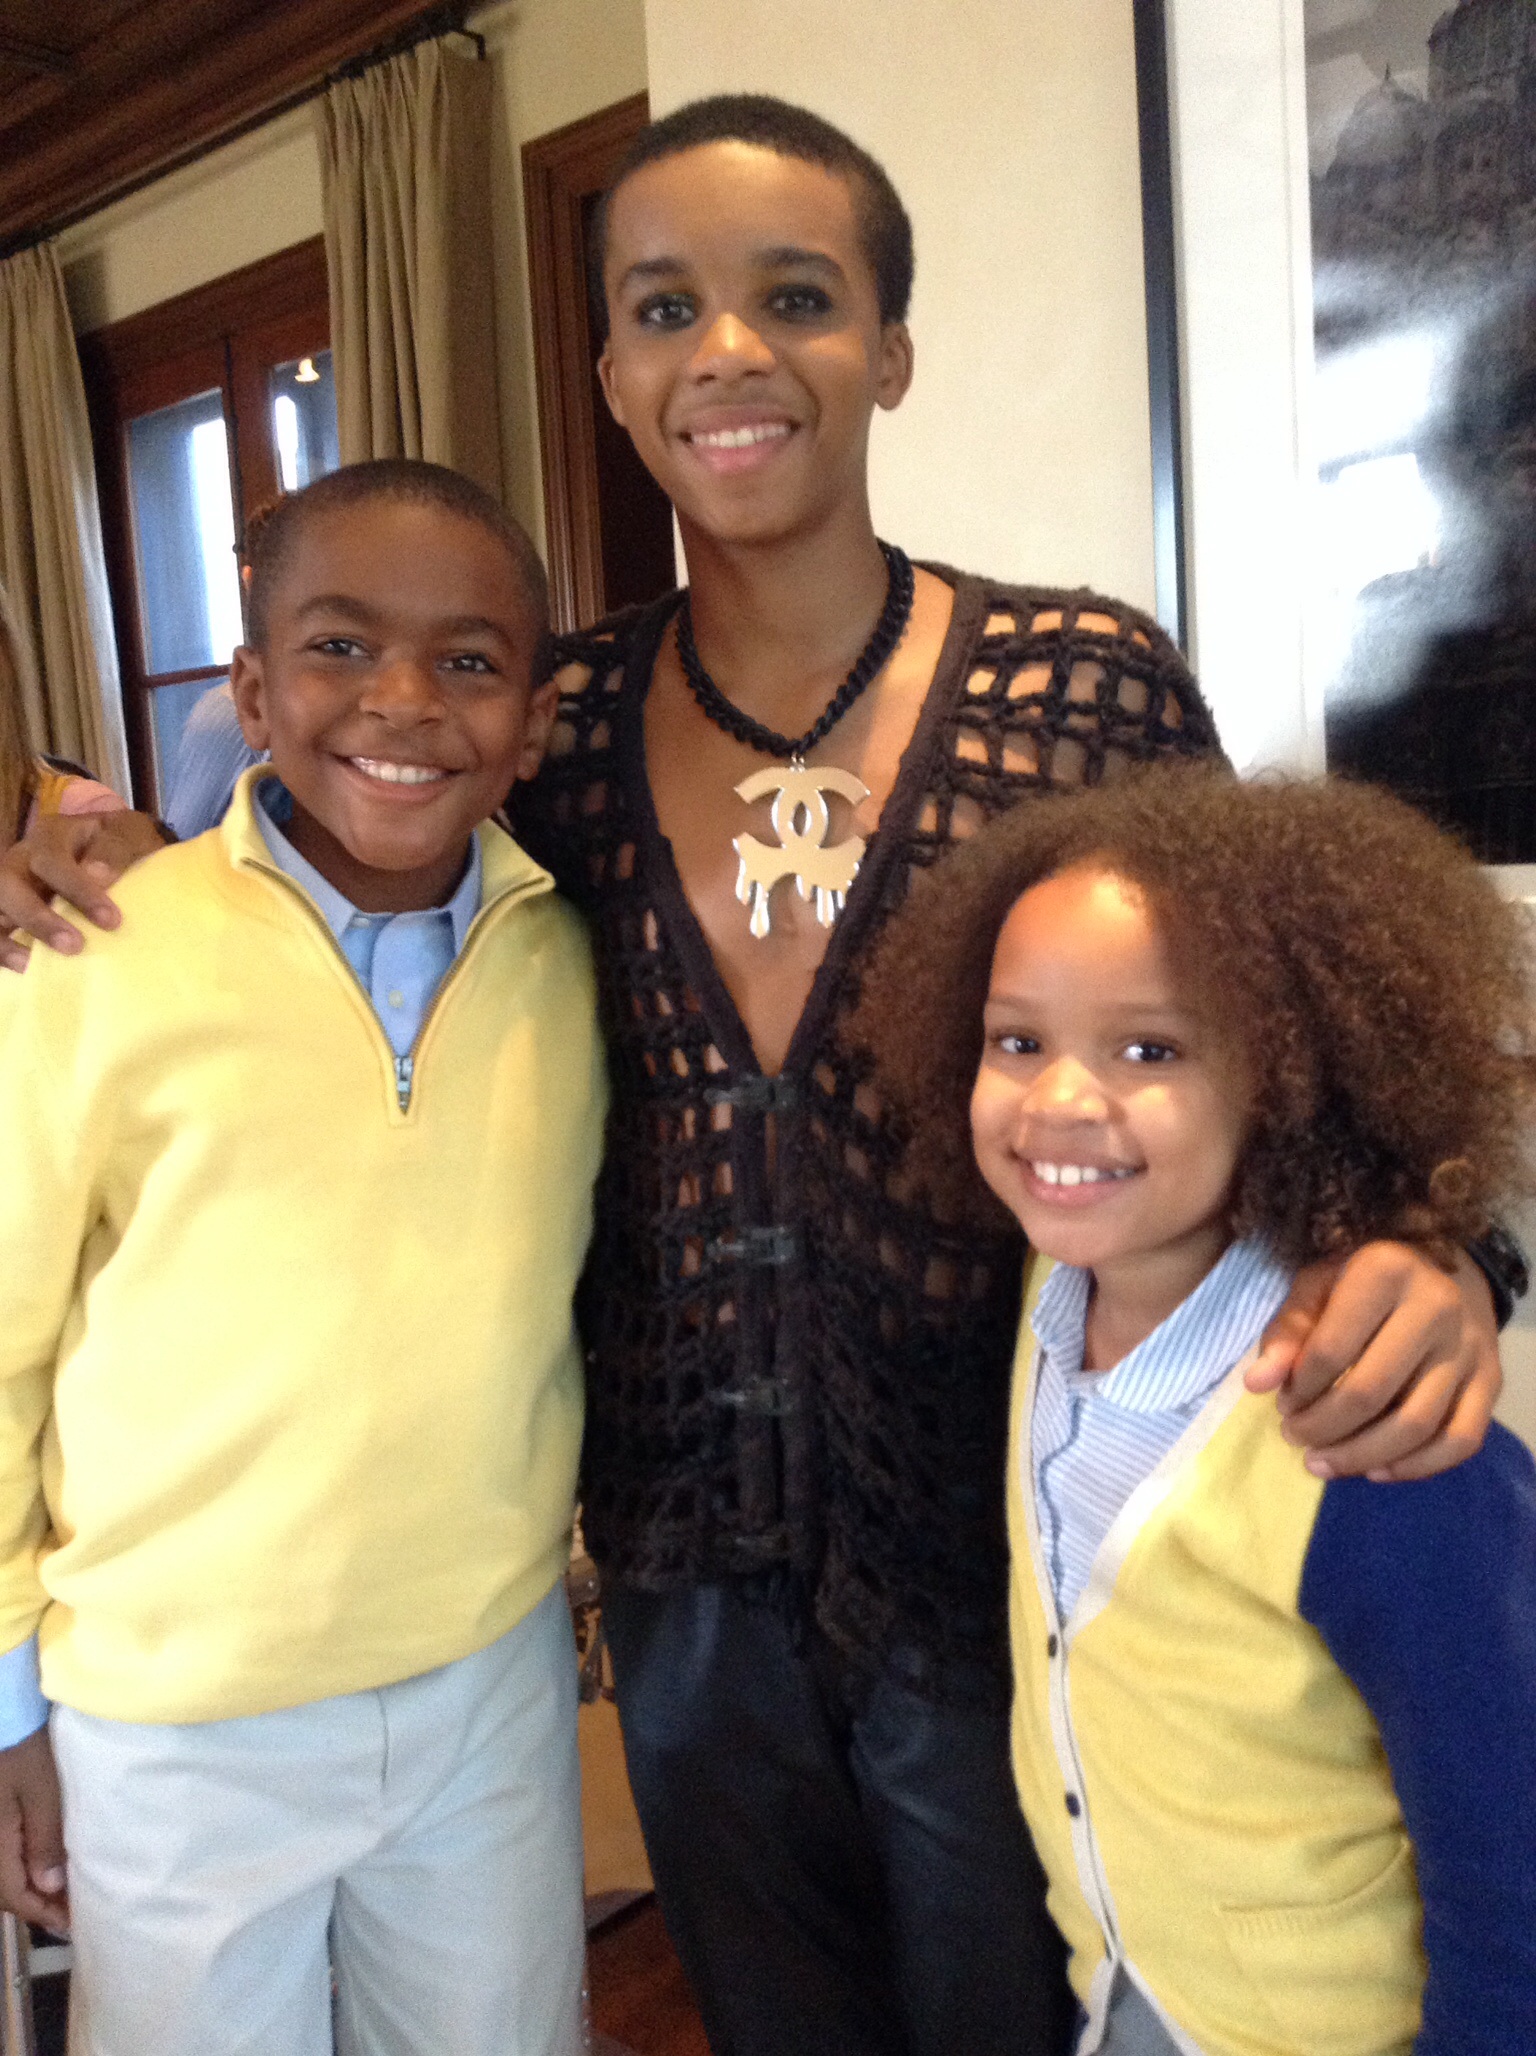 Brooklyn-Bella on set of 'House of Lies' with Donis Leonard Jr. and Myles Lamont.